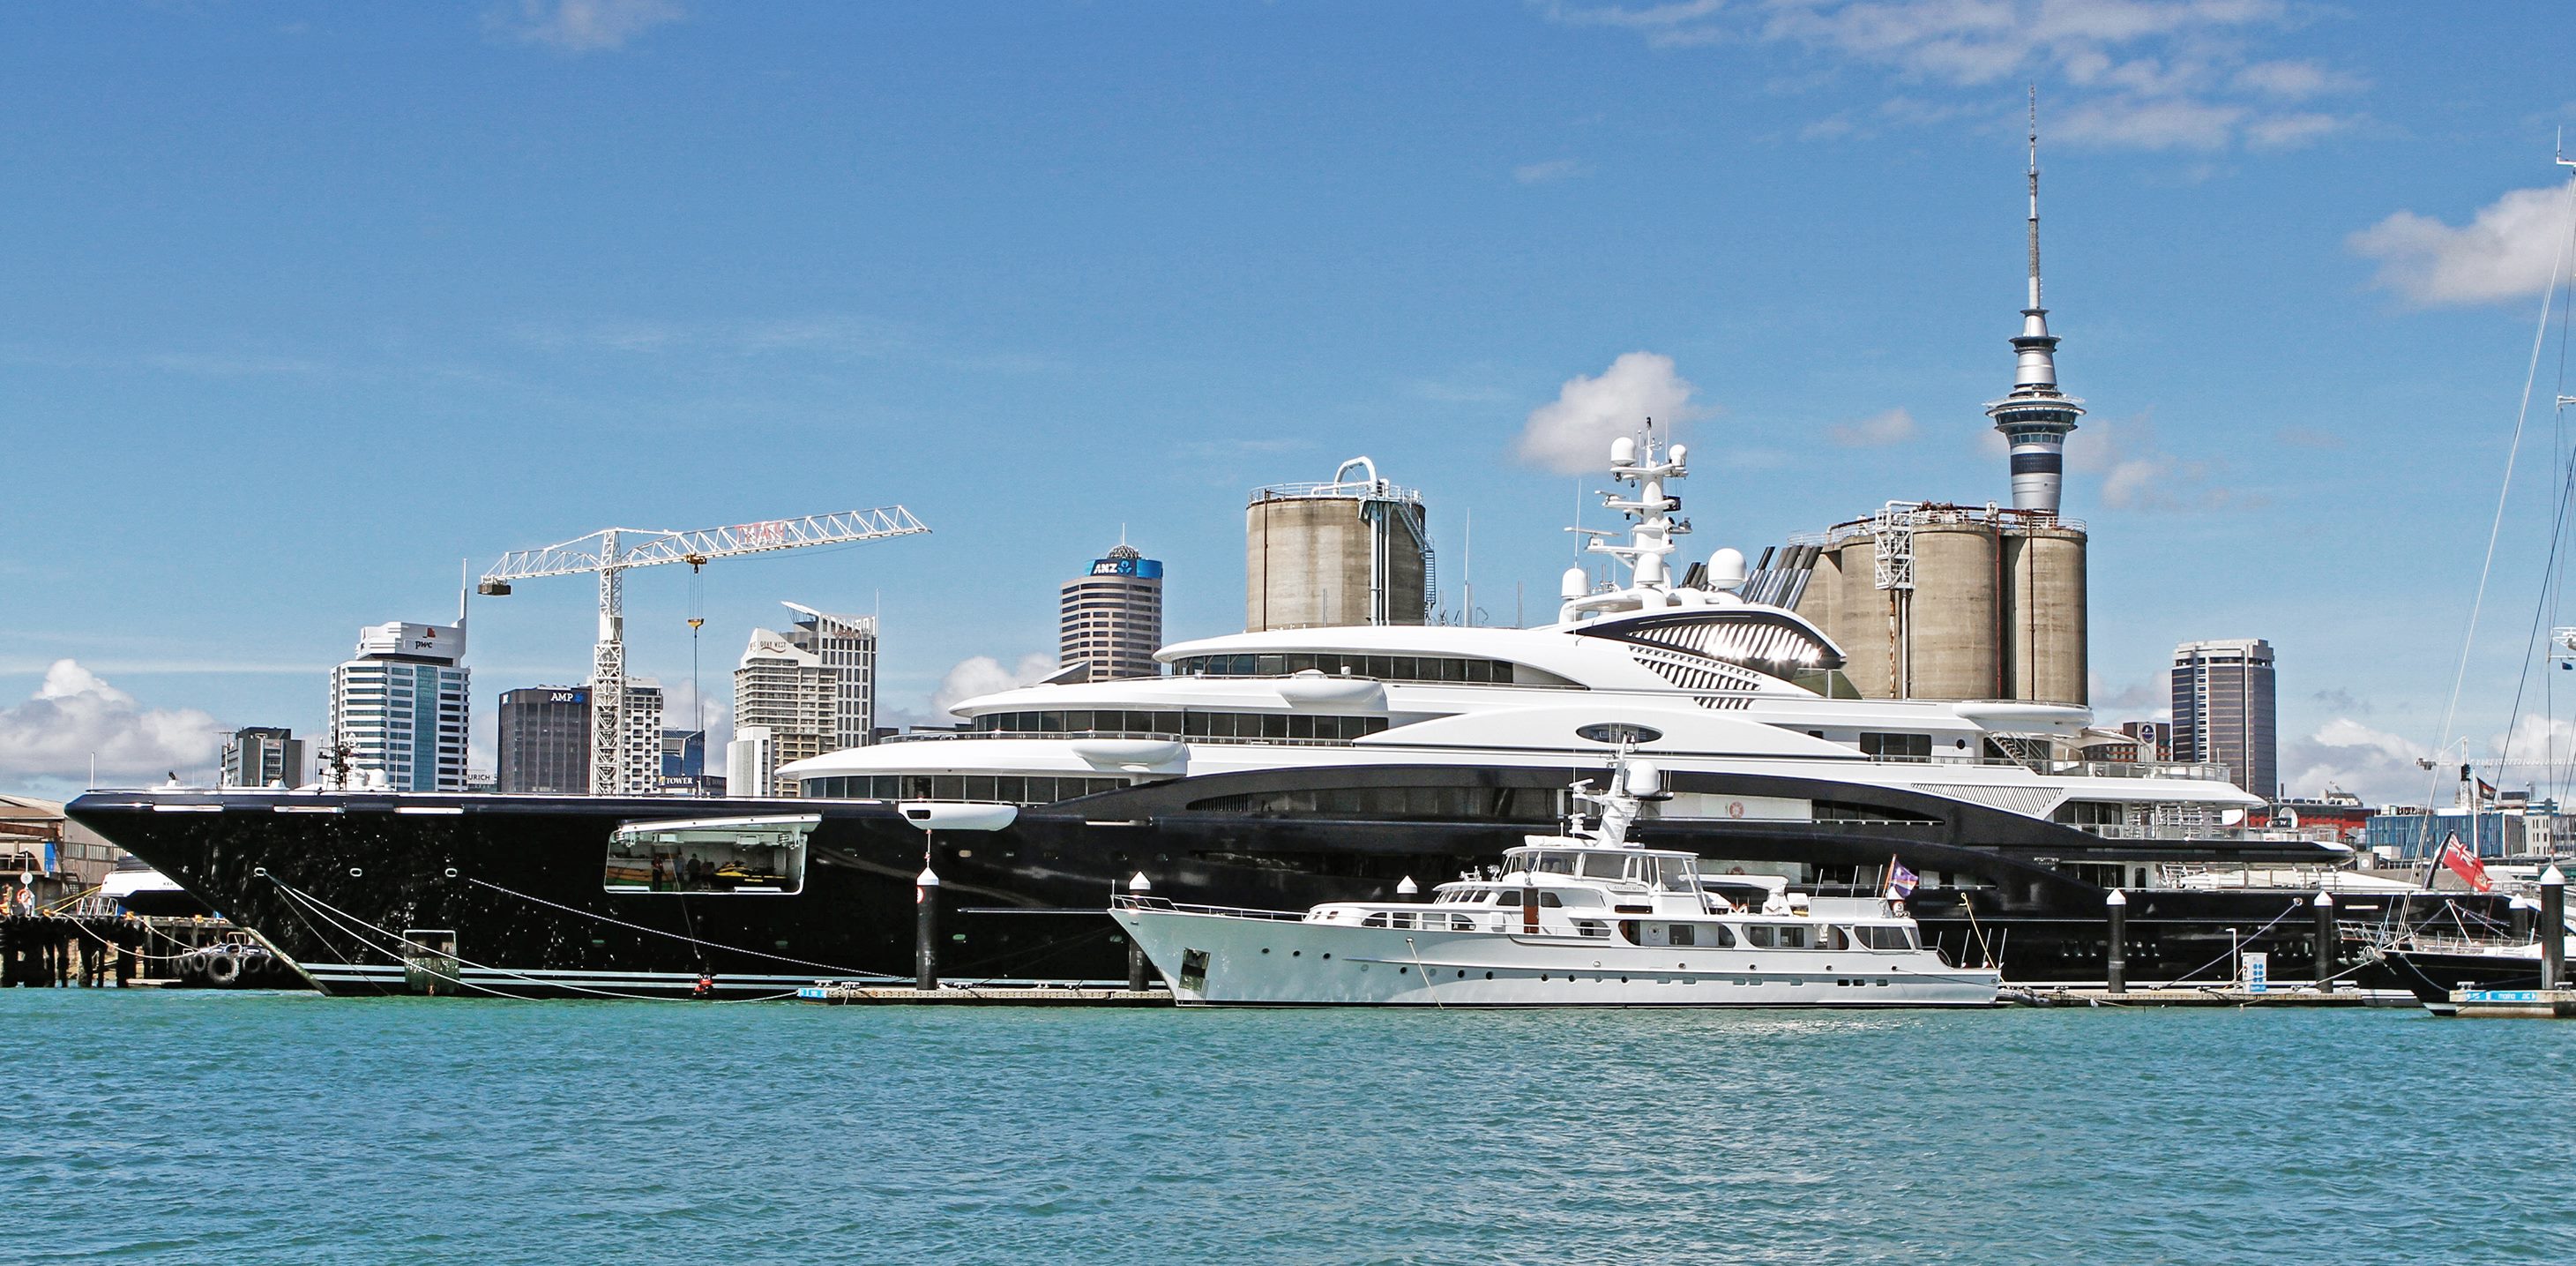 40 Alchemy, launched in 1970, is dwarfed by the 133m Serene, launched in 2011